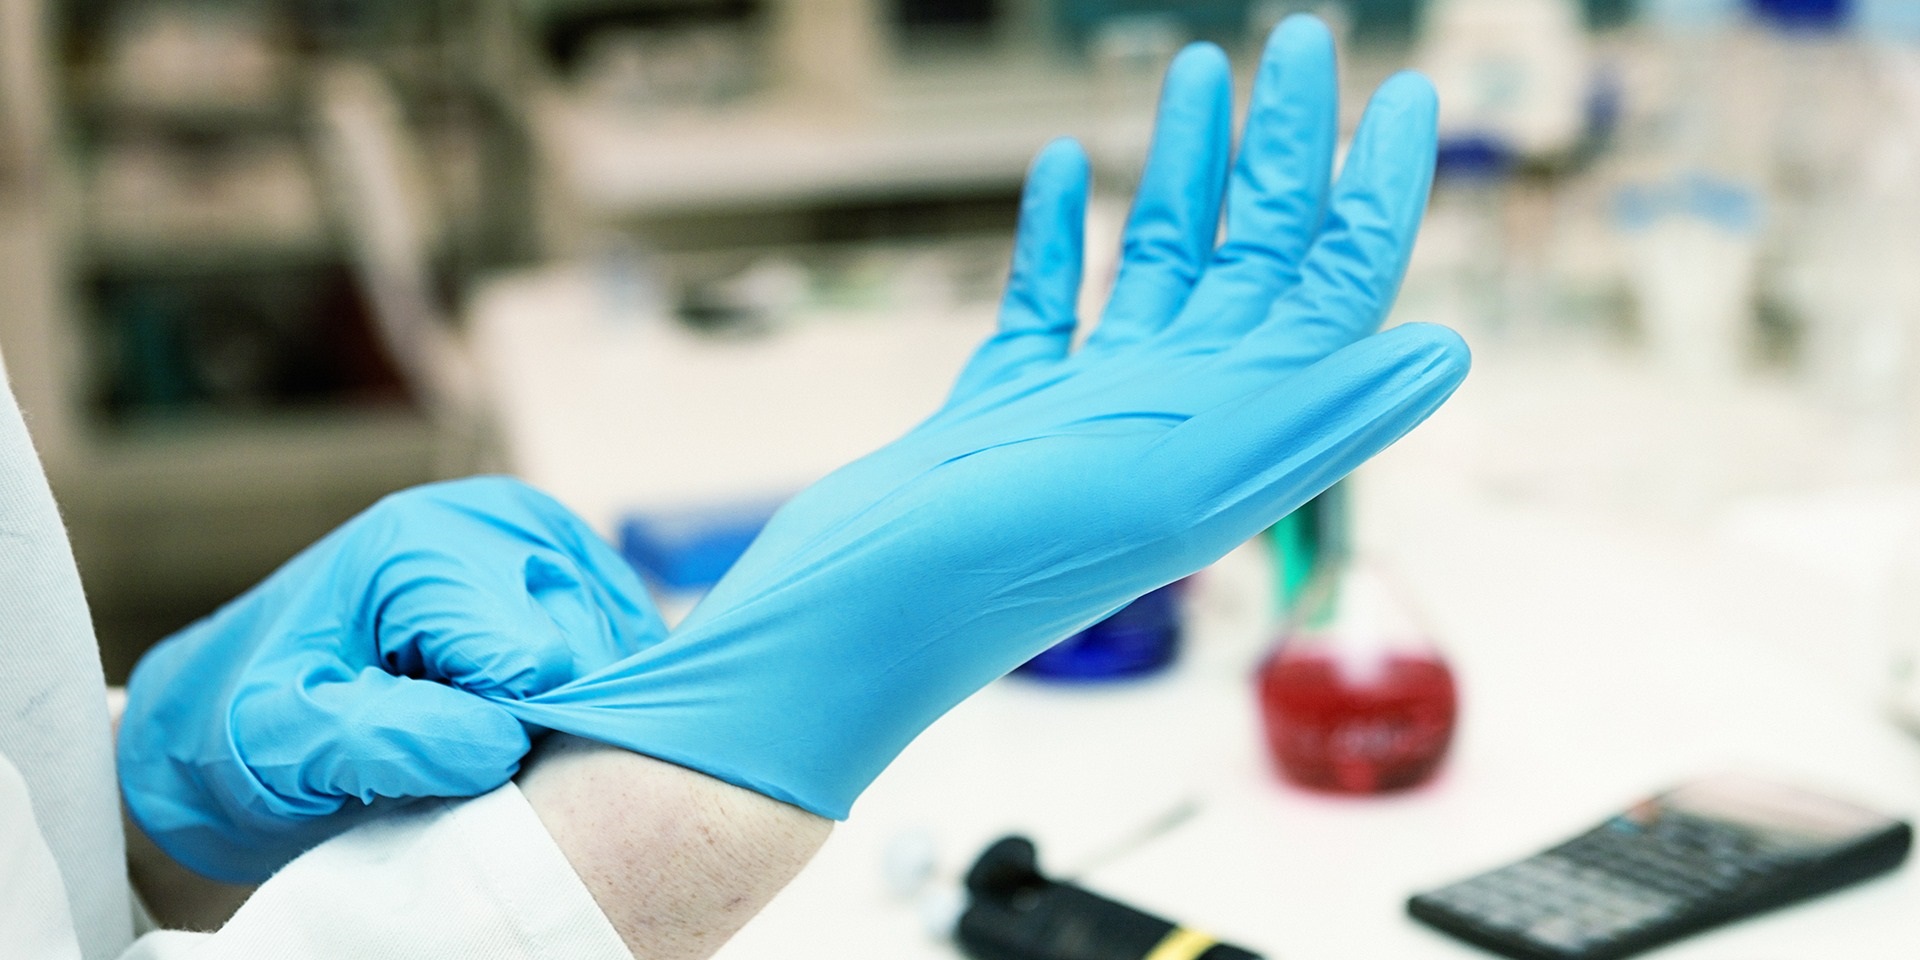 Working in Nitrile gloves